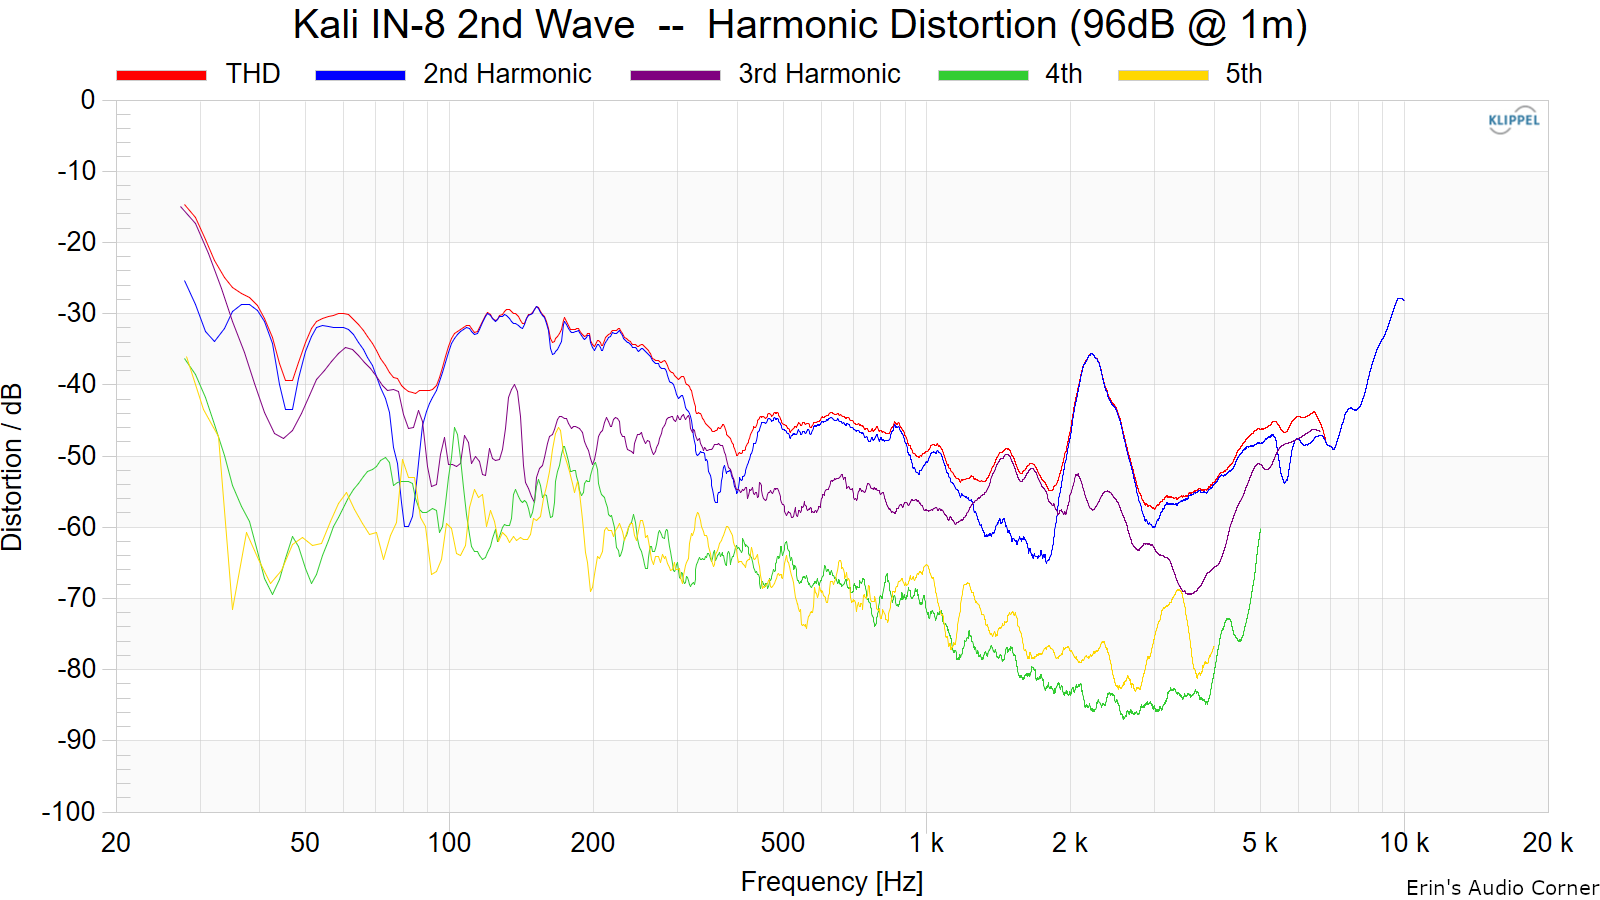 Kali%20IN-8%202nd%20Wave%20%20--%20%20Harmonic%20Distortion%20%2896dB%20%40%201m%29.png